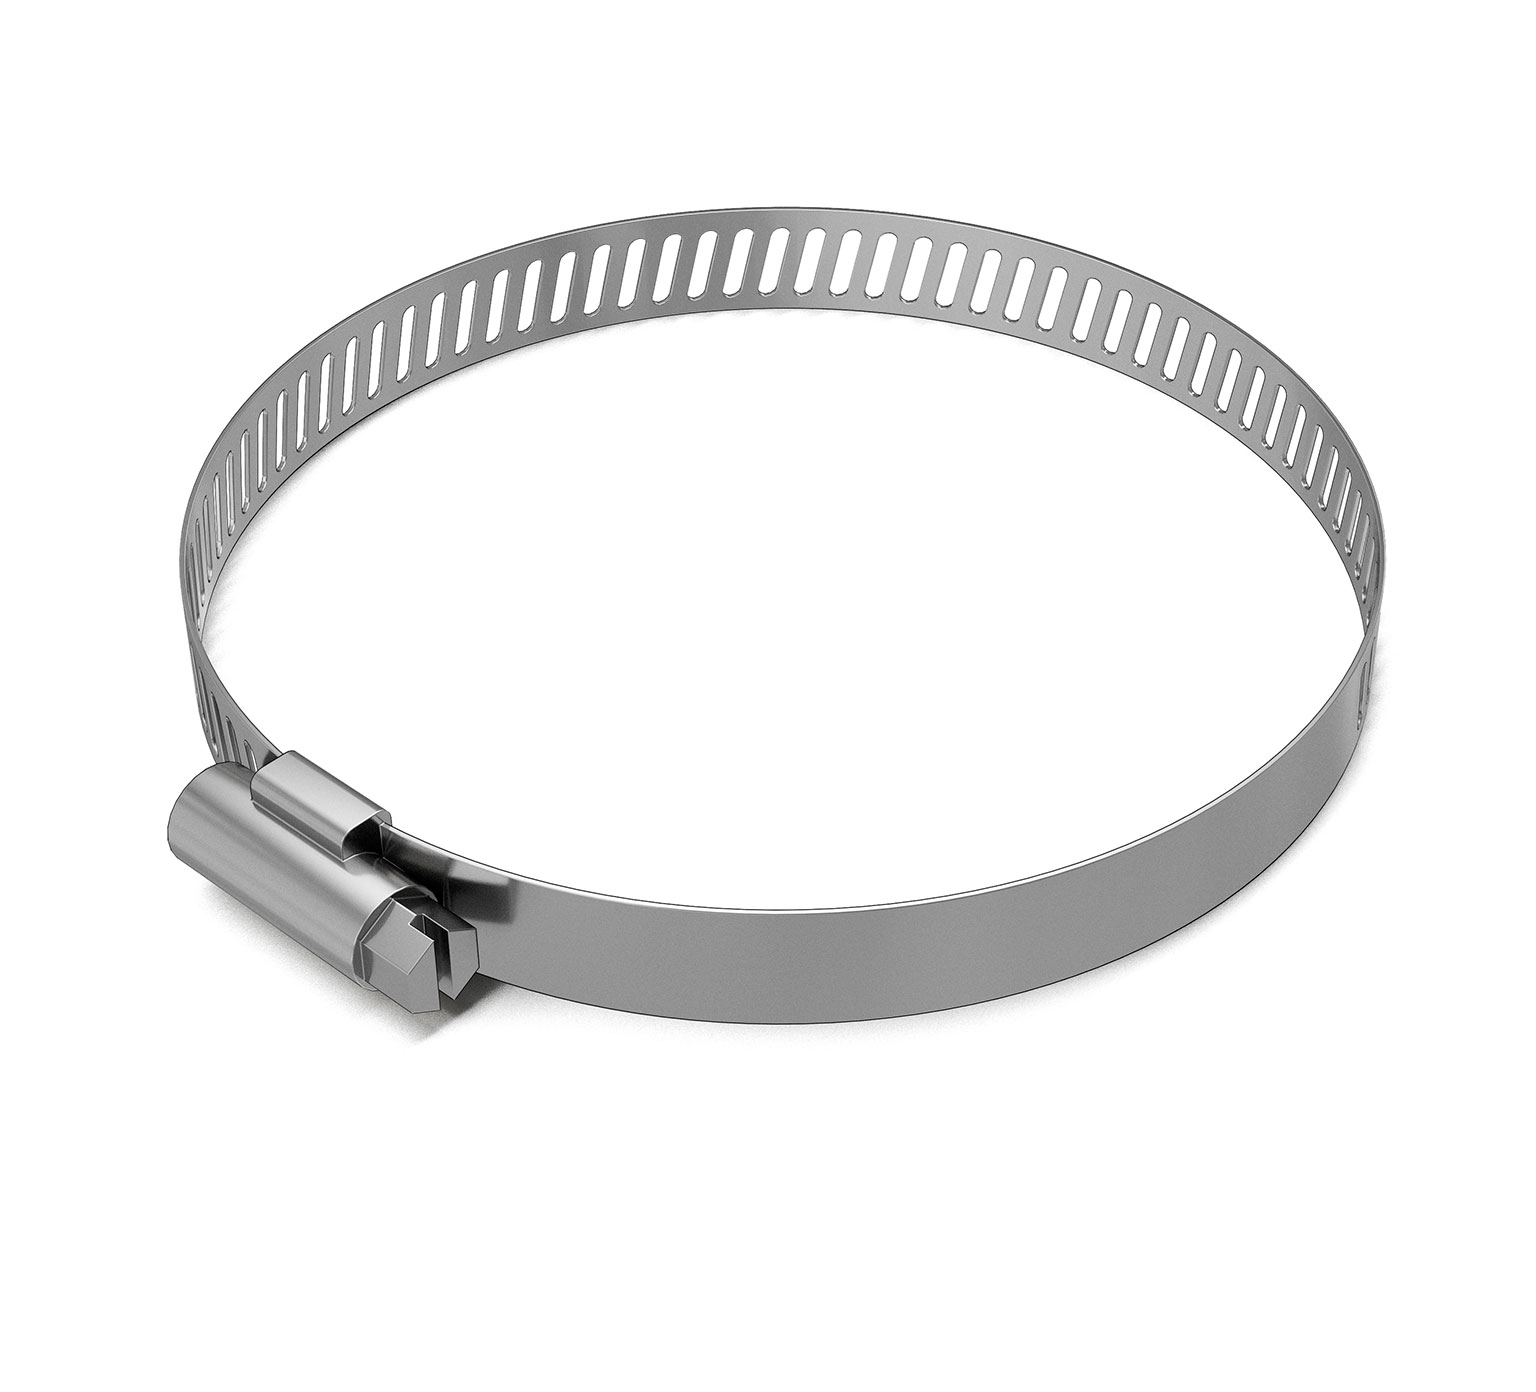 23498 Stainless Steel Hose Clamp - 3.562 - 4.5 in x 0.5 in alt 1